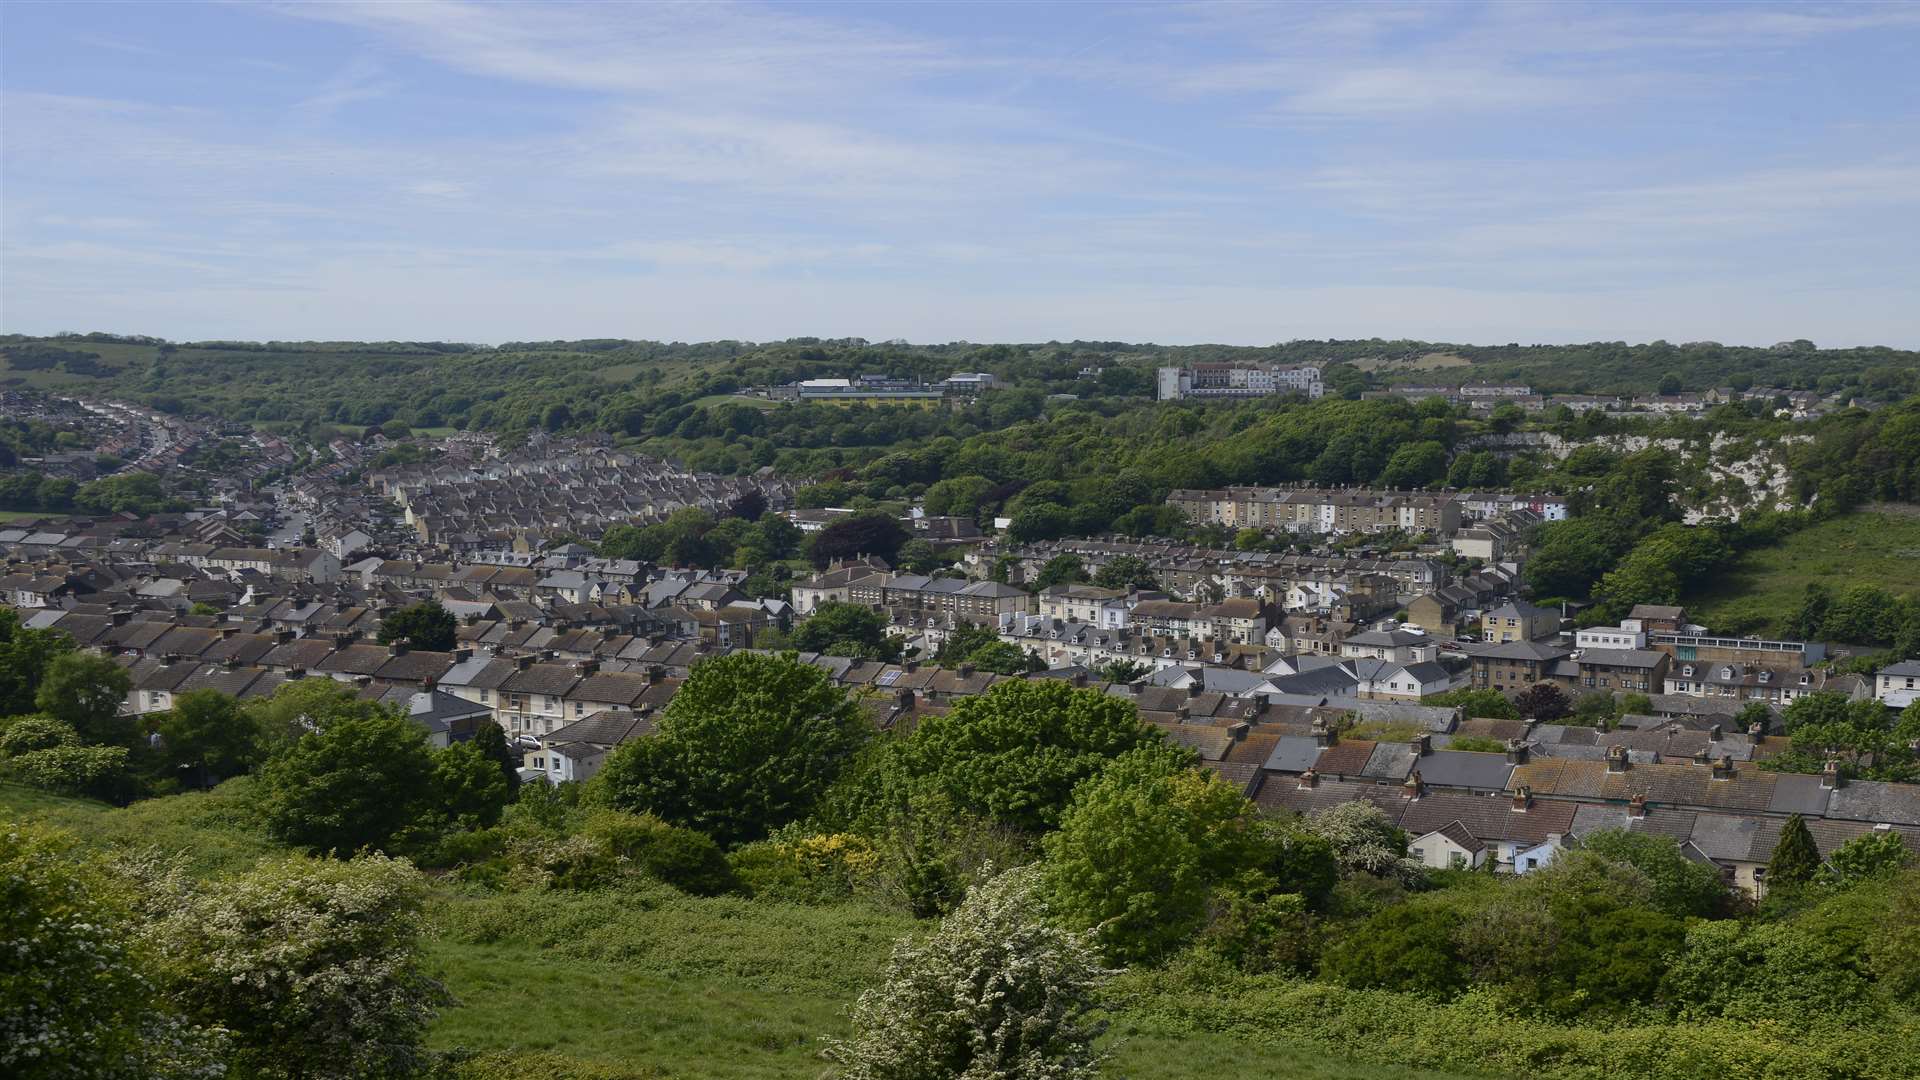 The Clarendon and Westbury neighbourhood in the foreground. Among Dover's poorer areas